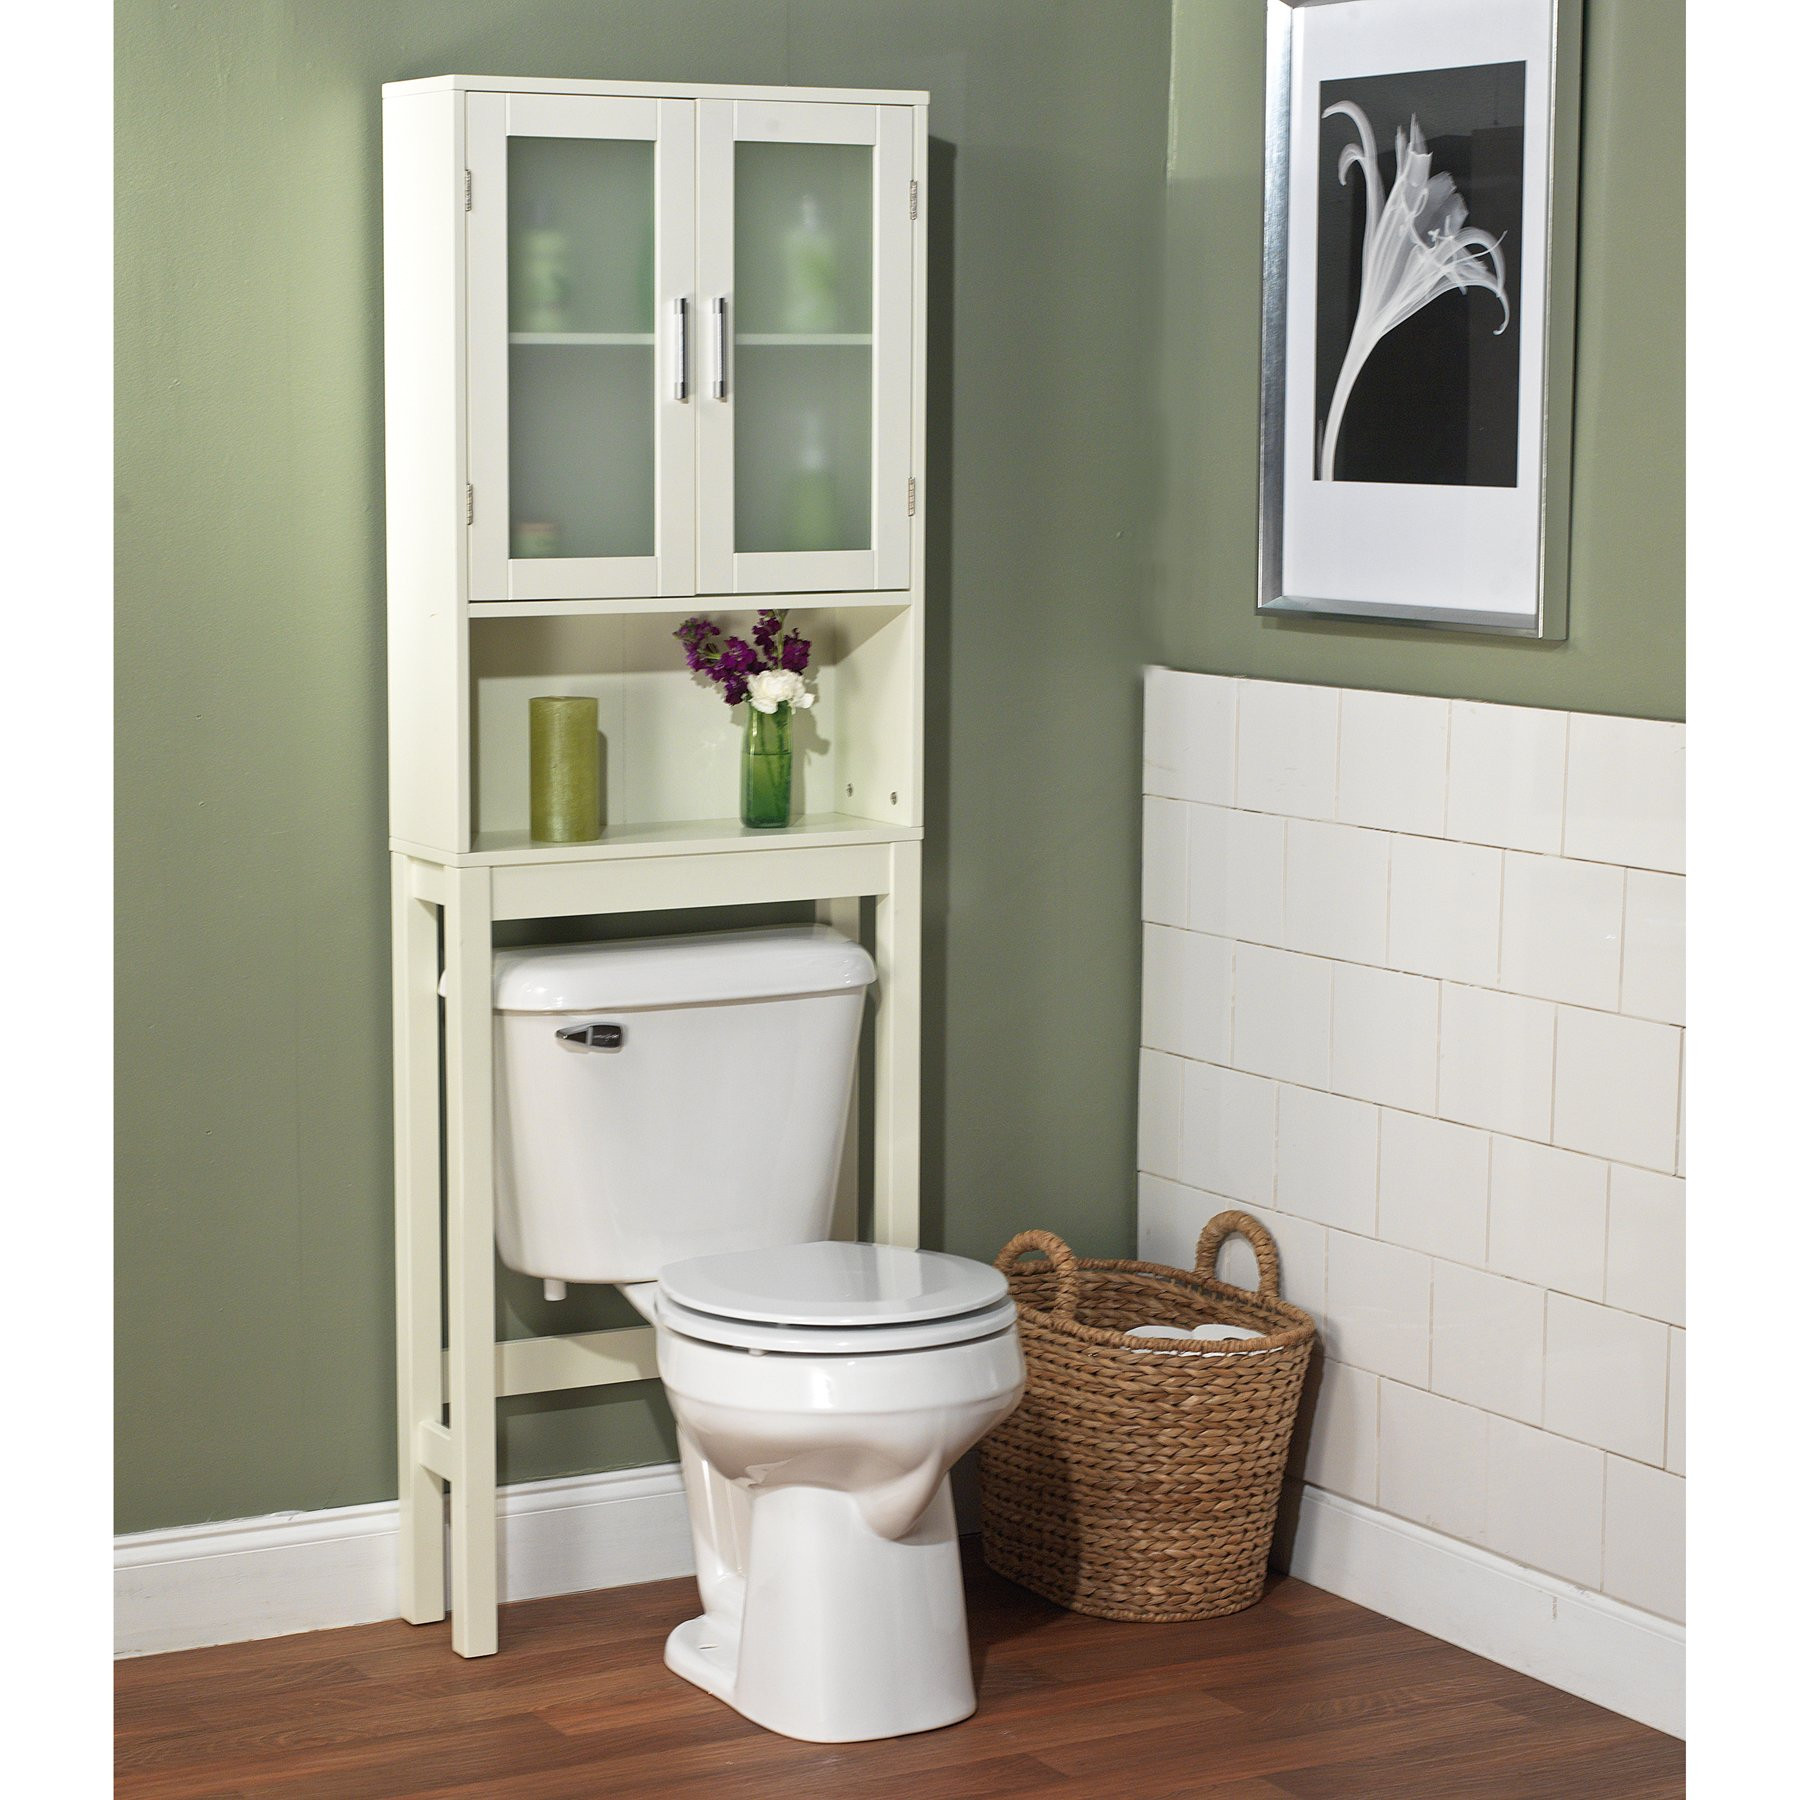 Lowes Bathroom Storage
 Bathroom Toilet Cabinet For Easy Access